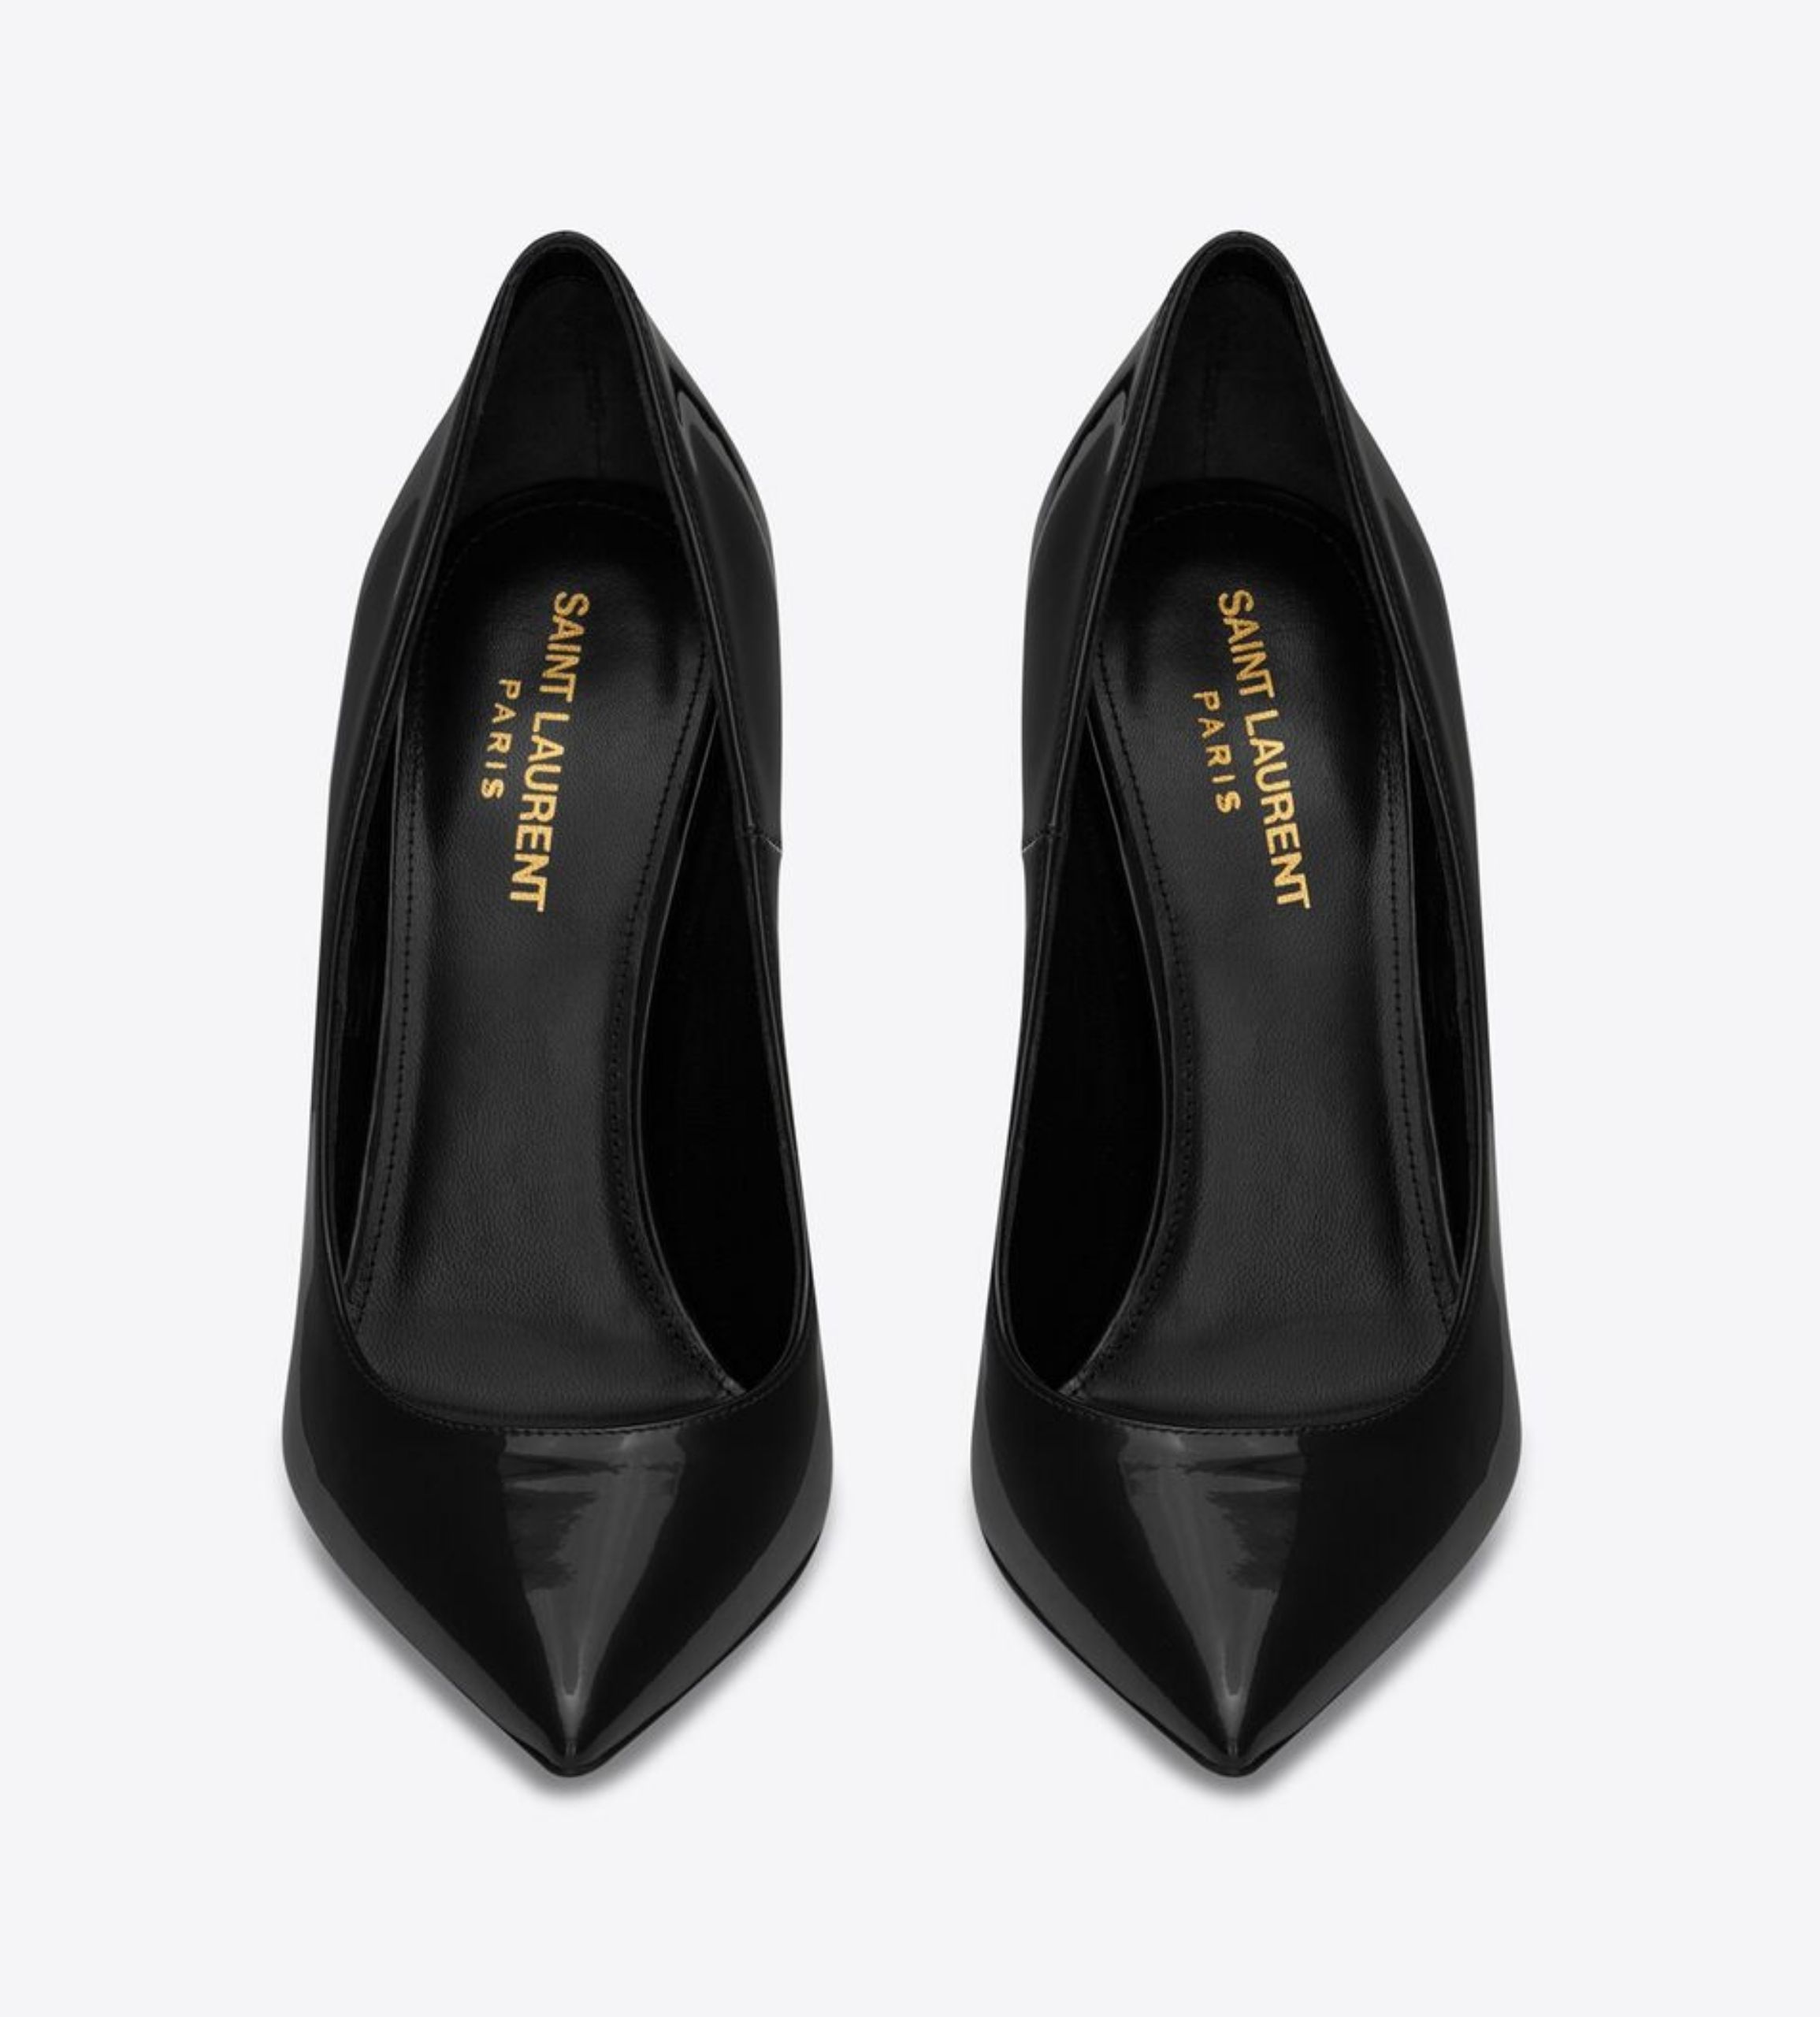 opyum pumps in patent leather